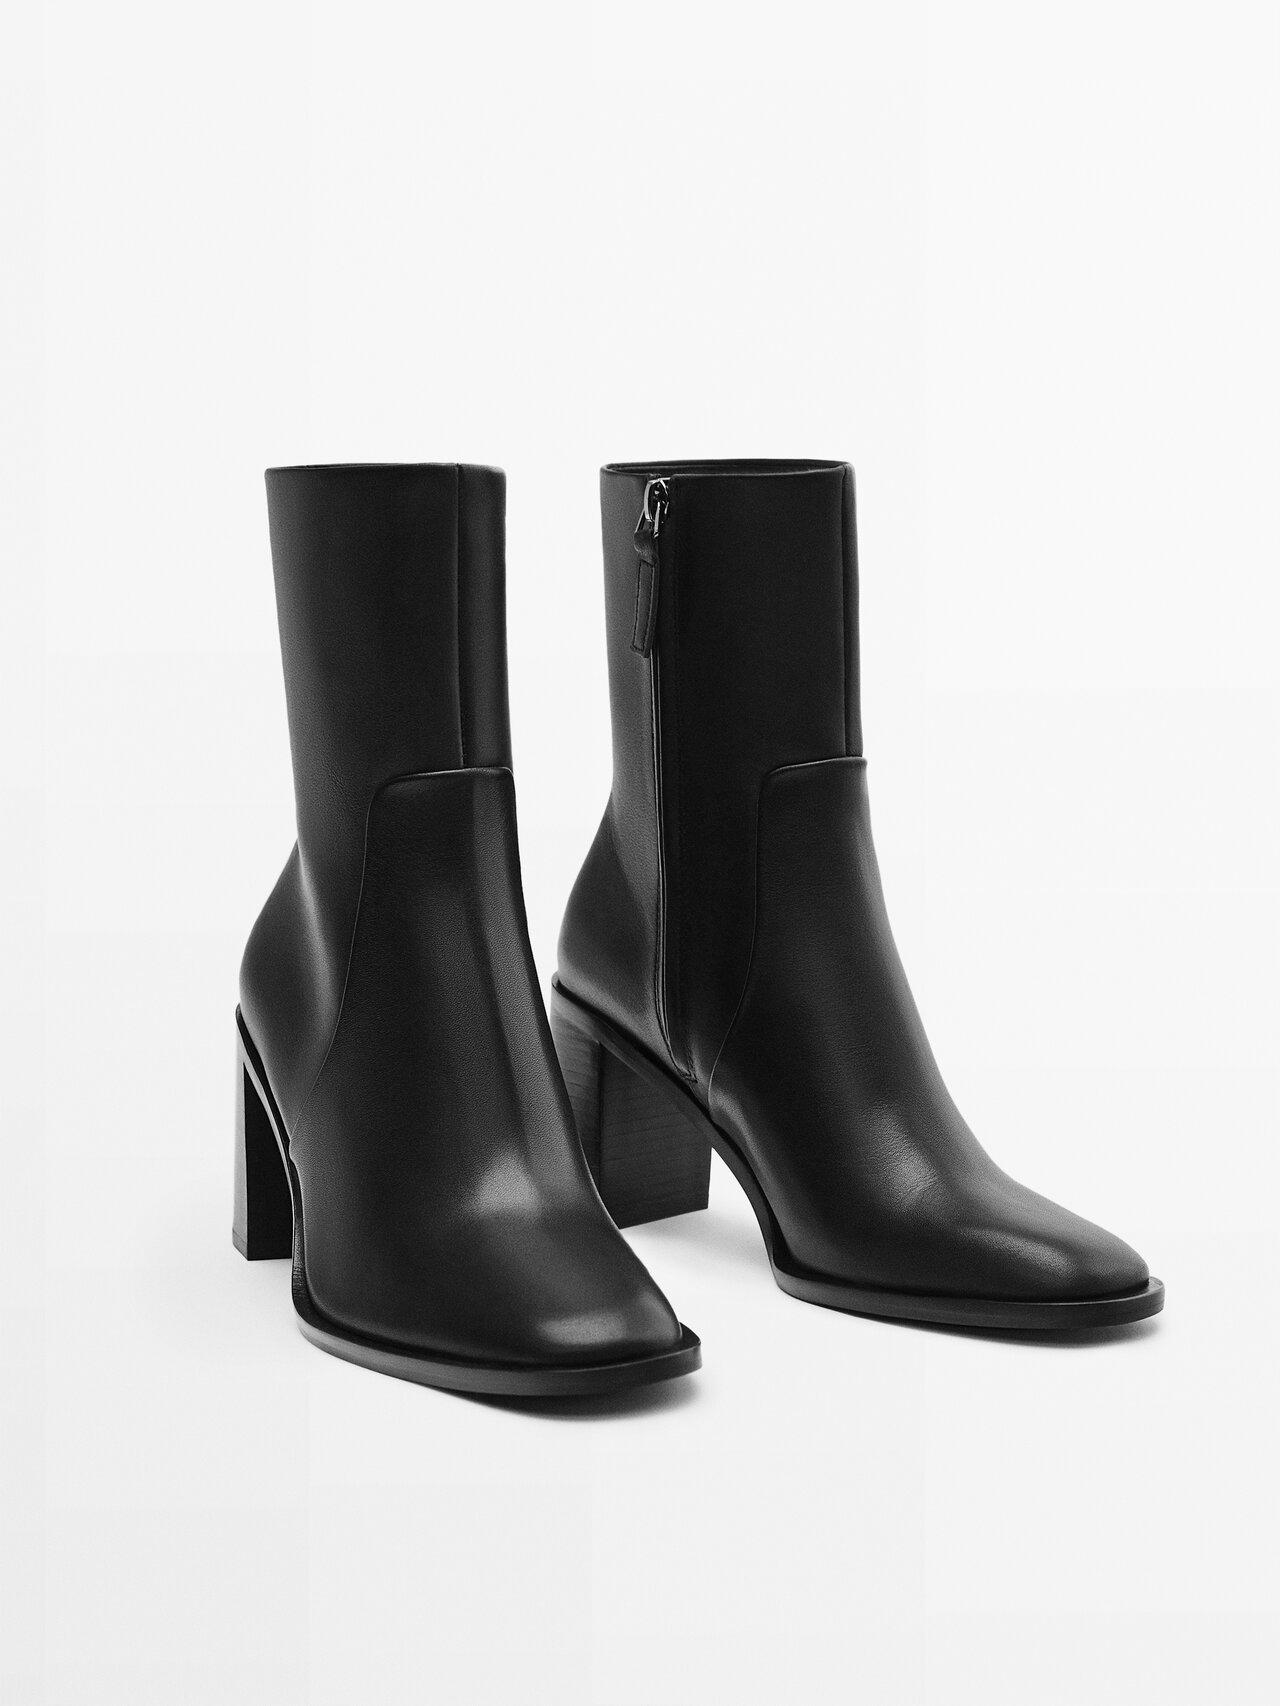 MASSIMO DUTTI Leather Ankle Boots With Block Heels in Black | Lyst